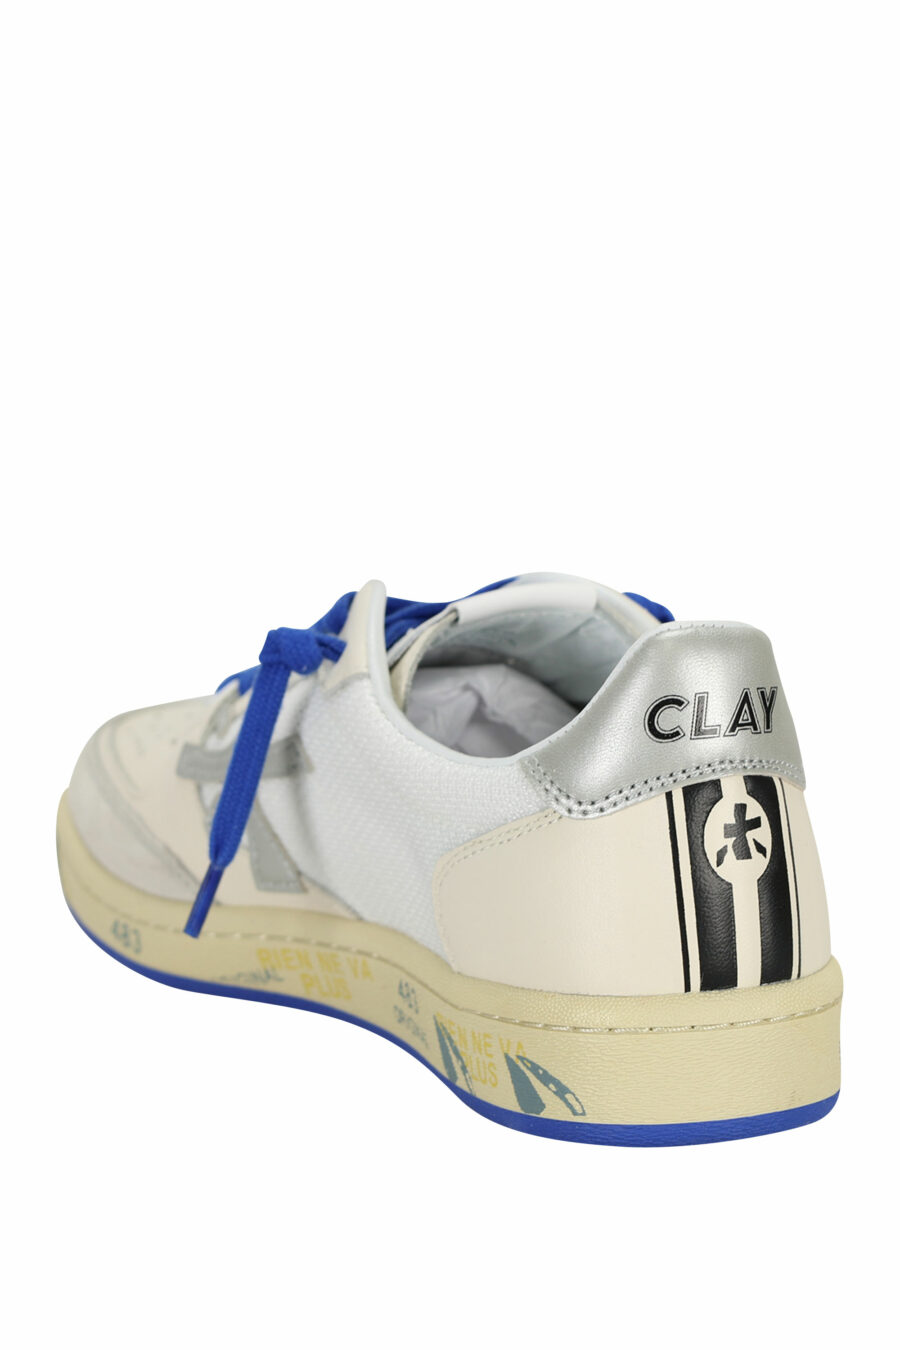 Chaussures blanches et bleues BSKTCLAY 6810 - 8053680315294 3